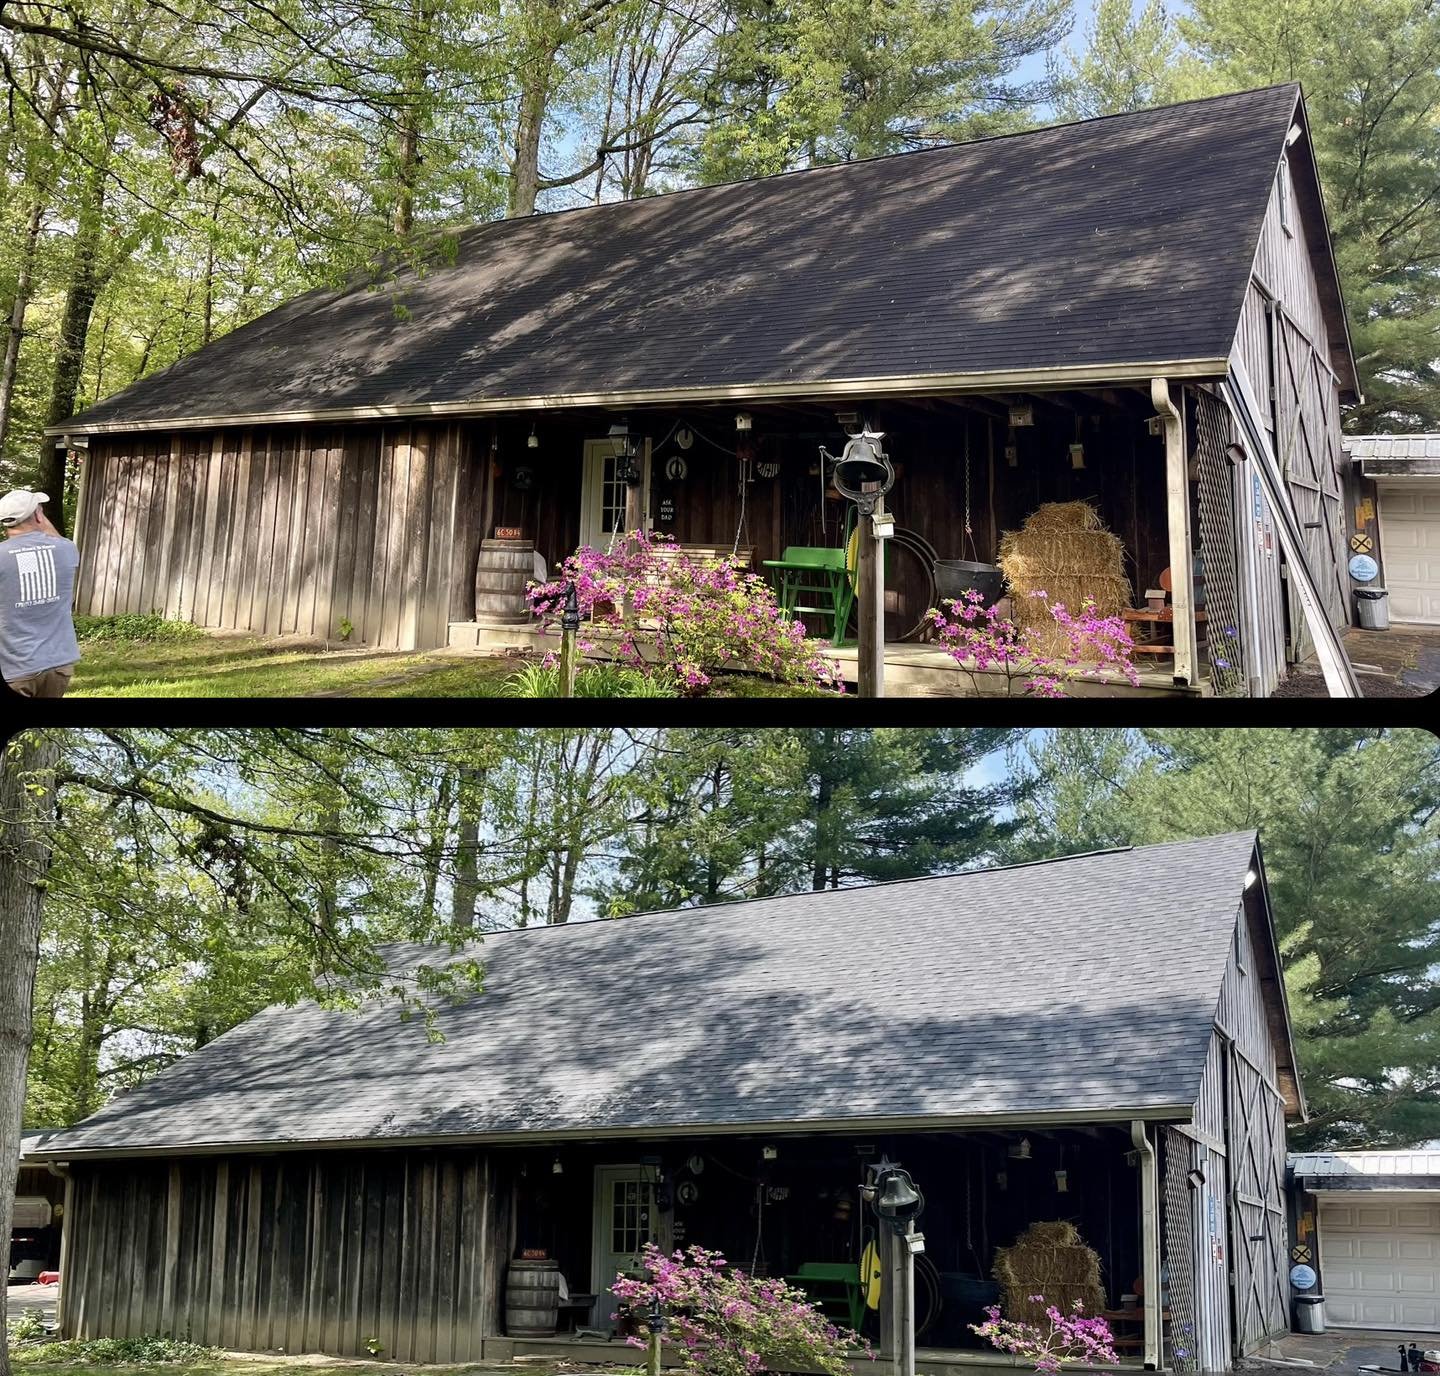 Last week we were busy doing estimates and watching it rain&hellip; Beautiful weather today allowed us to knock out these two buildings! Call us for your free estimate!  #NewRoof #PayLessWithWes